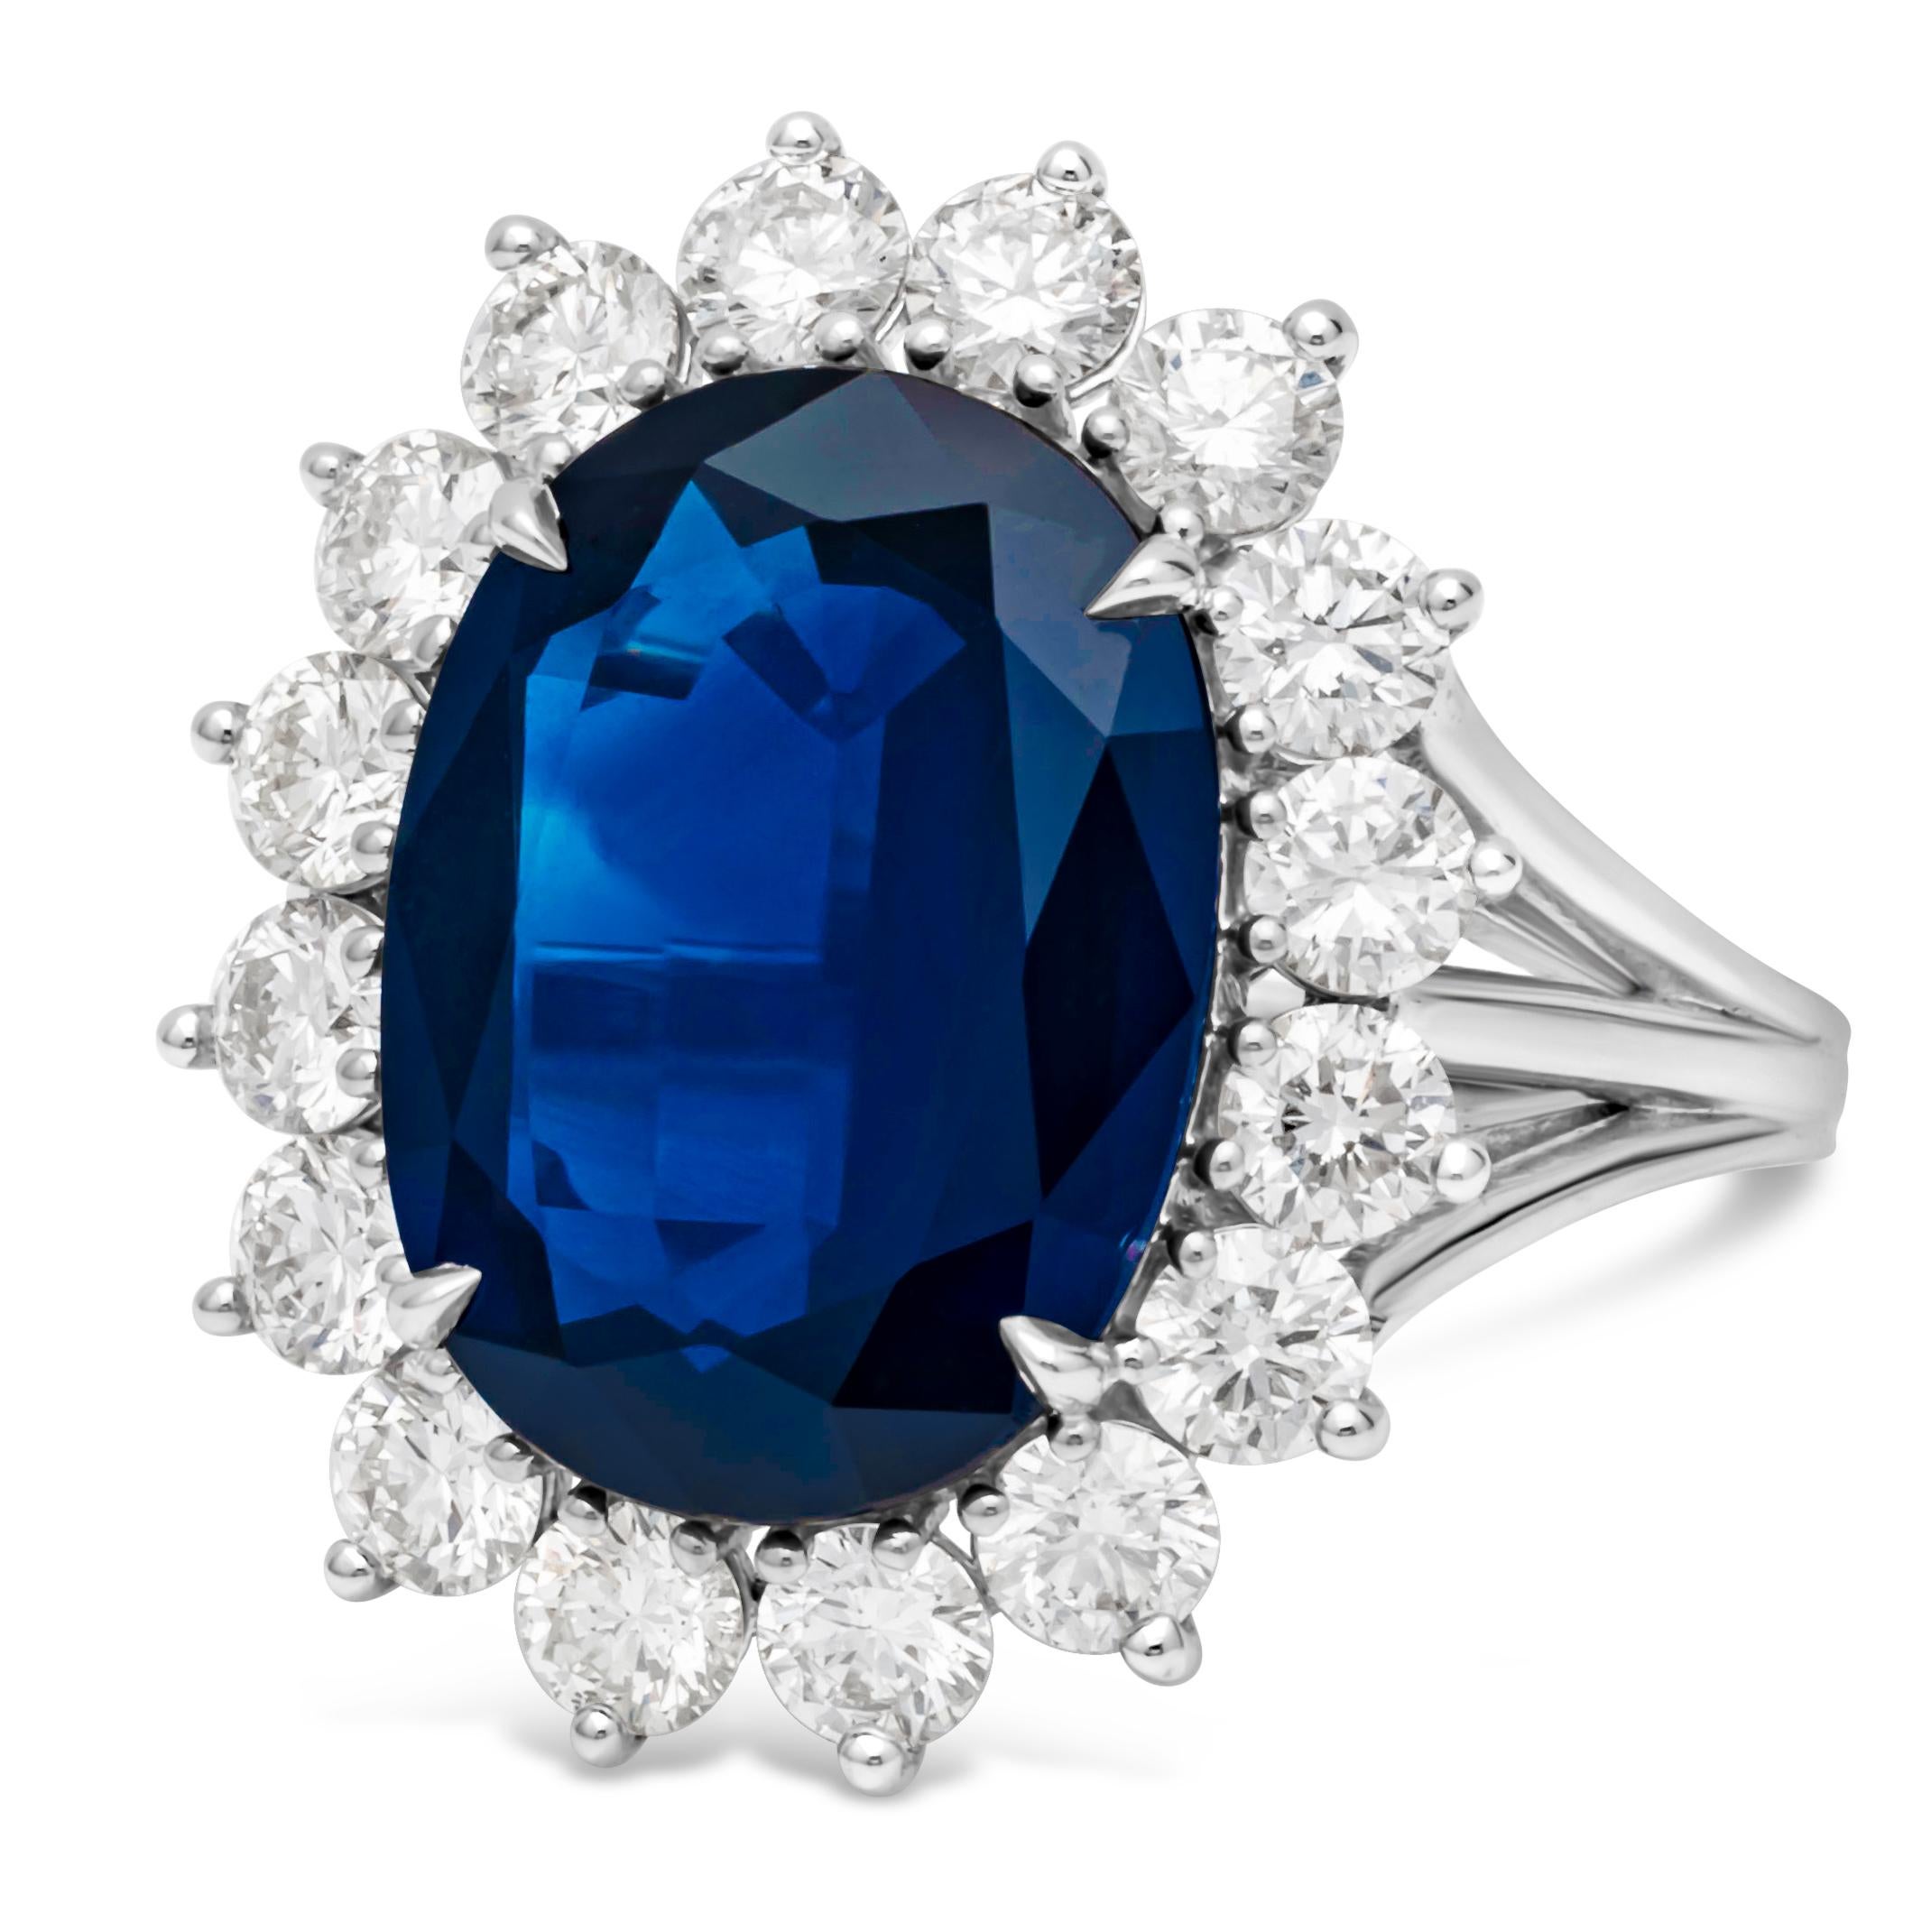 A color-rich piece of jewelry showcasing an oval cut blue sapphire center stone weighing 7.71 carats, set in a classic four prong basket setting. Surrounded by single row of brilliant round diamonds weighing 1.85 carats total, set in a three-prong